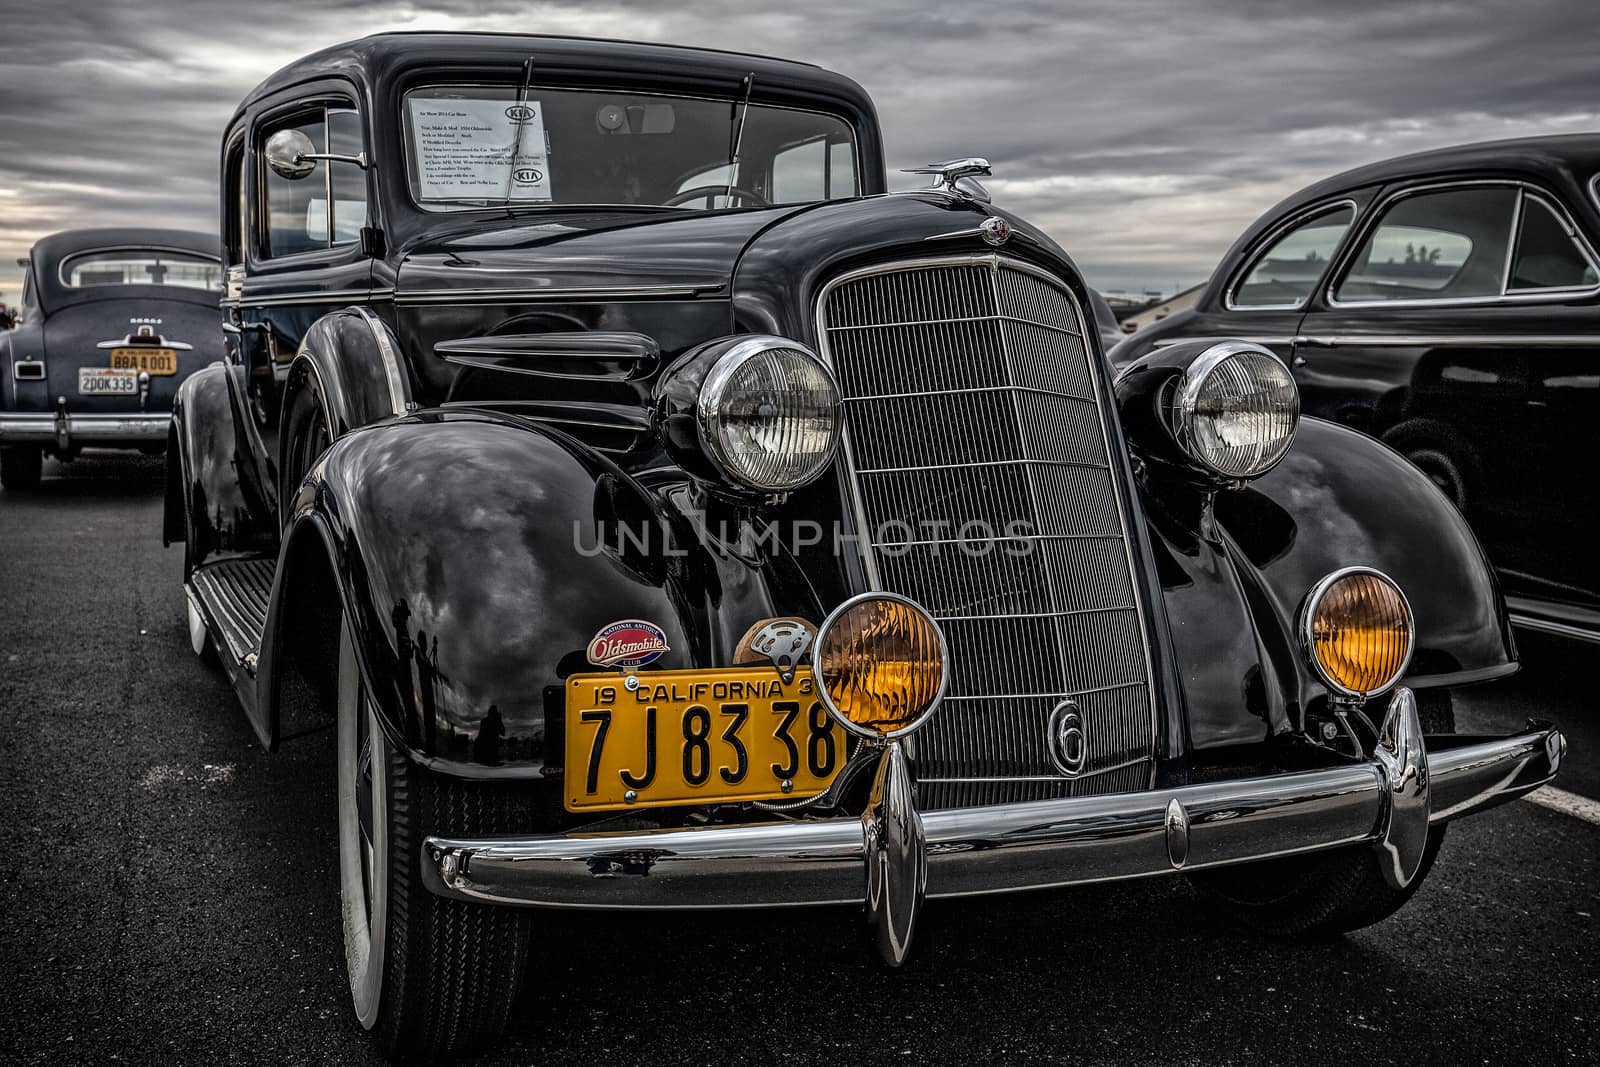 Redding, California, USA-September 28, 2014: A restored 1934 black Oldsmobile classic on display at a car show in Redding showing off it's chrome front end and highly polished paint.